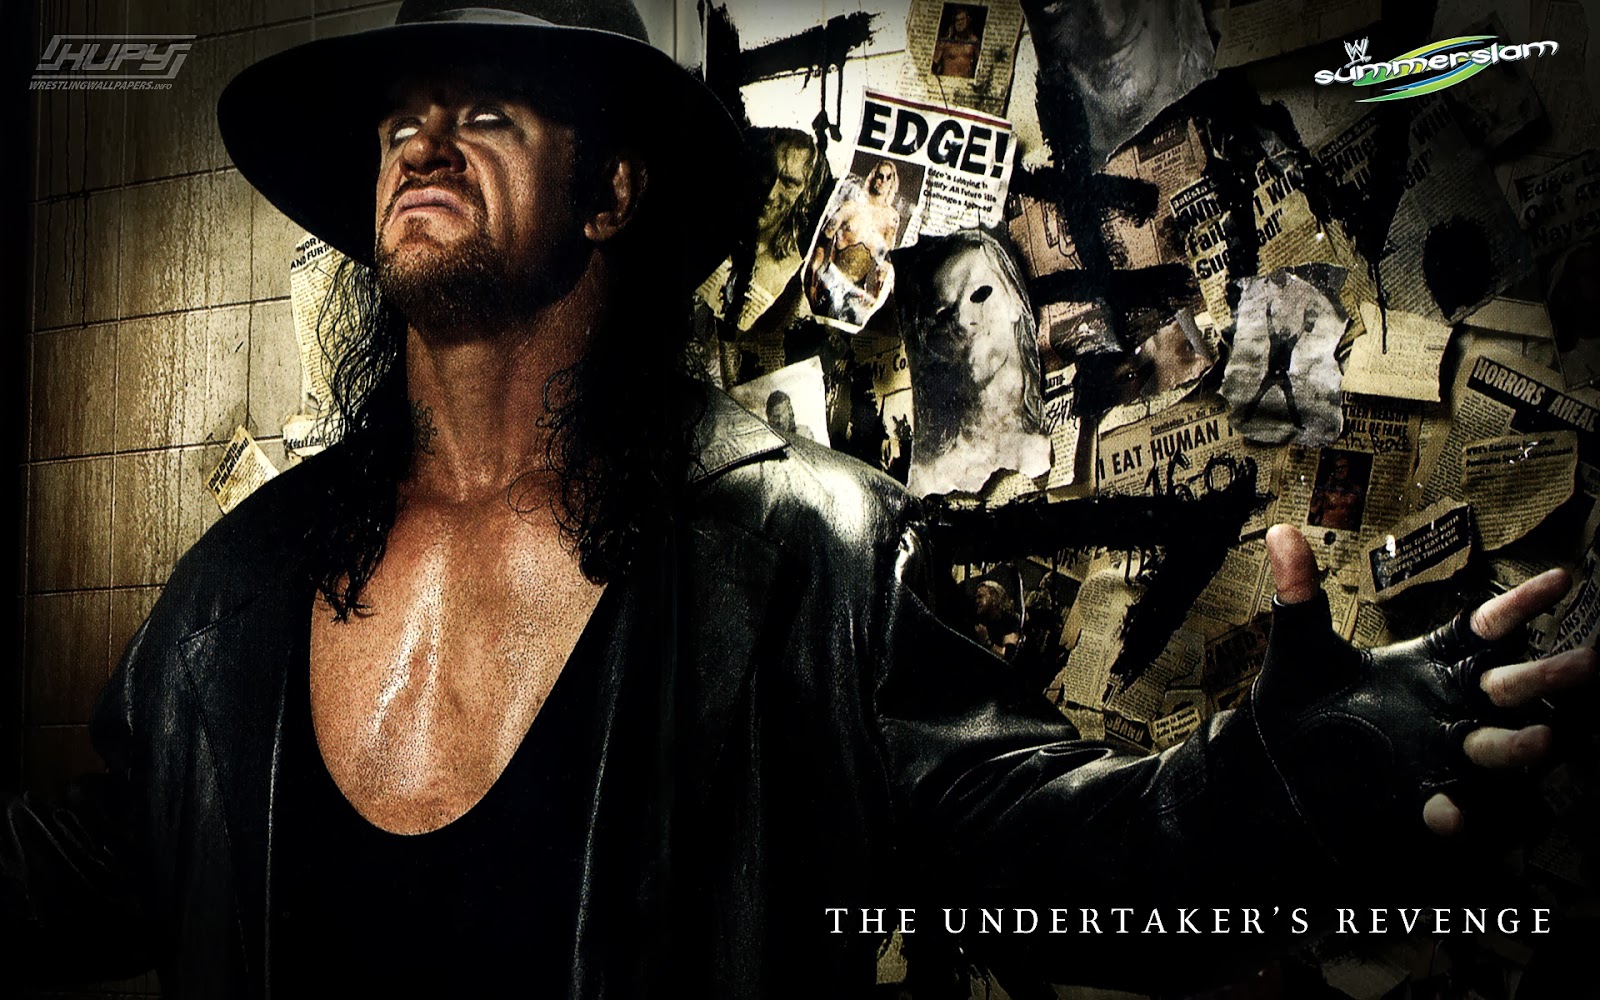 wwe hd wallpaper download,movie,font,album cover,action film,photography